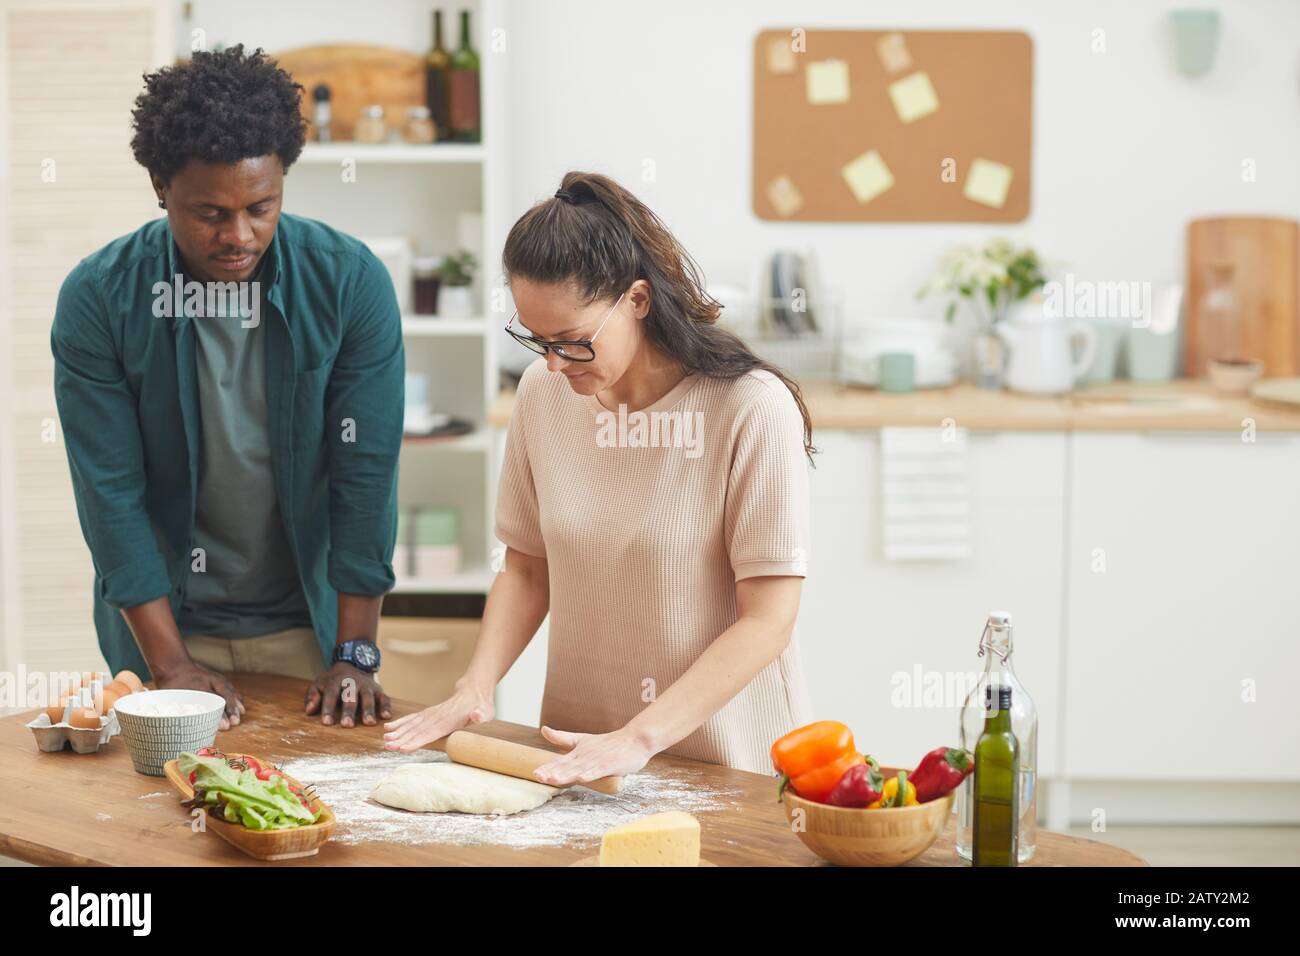 Young woman in eyeglasses standing and rolling dough with her boyfriend helping her they are in the kitchen at home Stock Photo